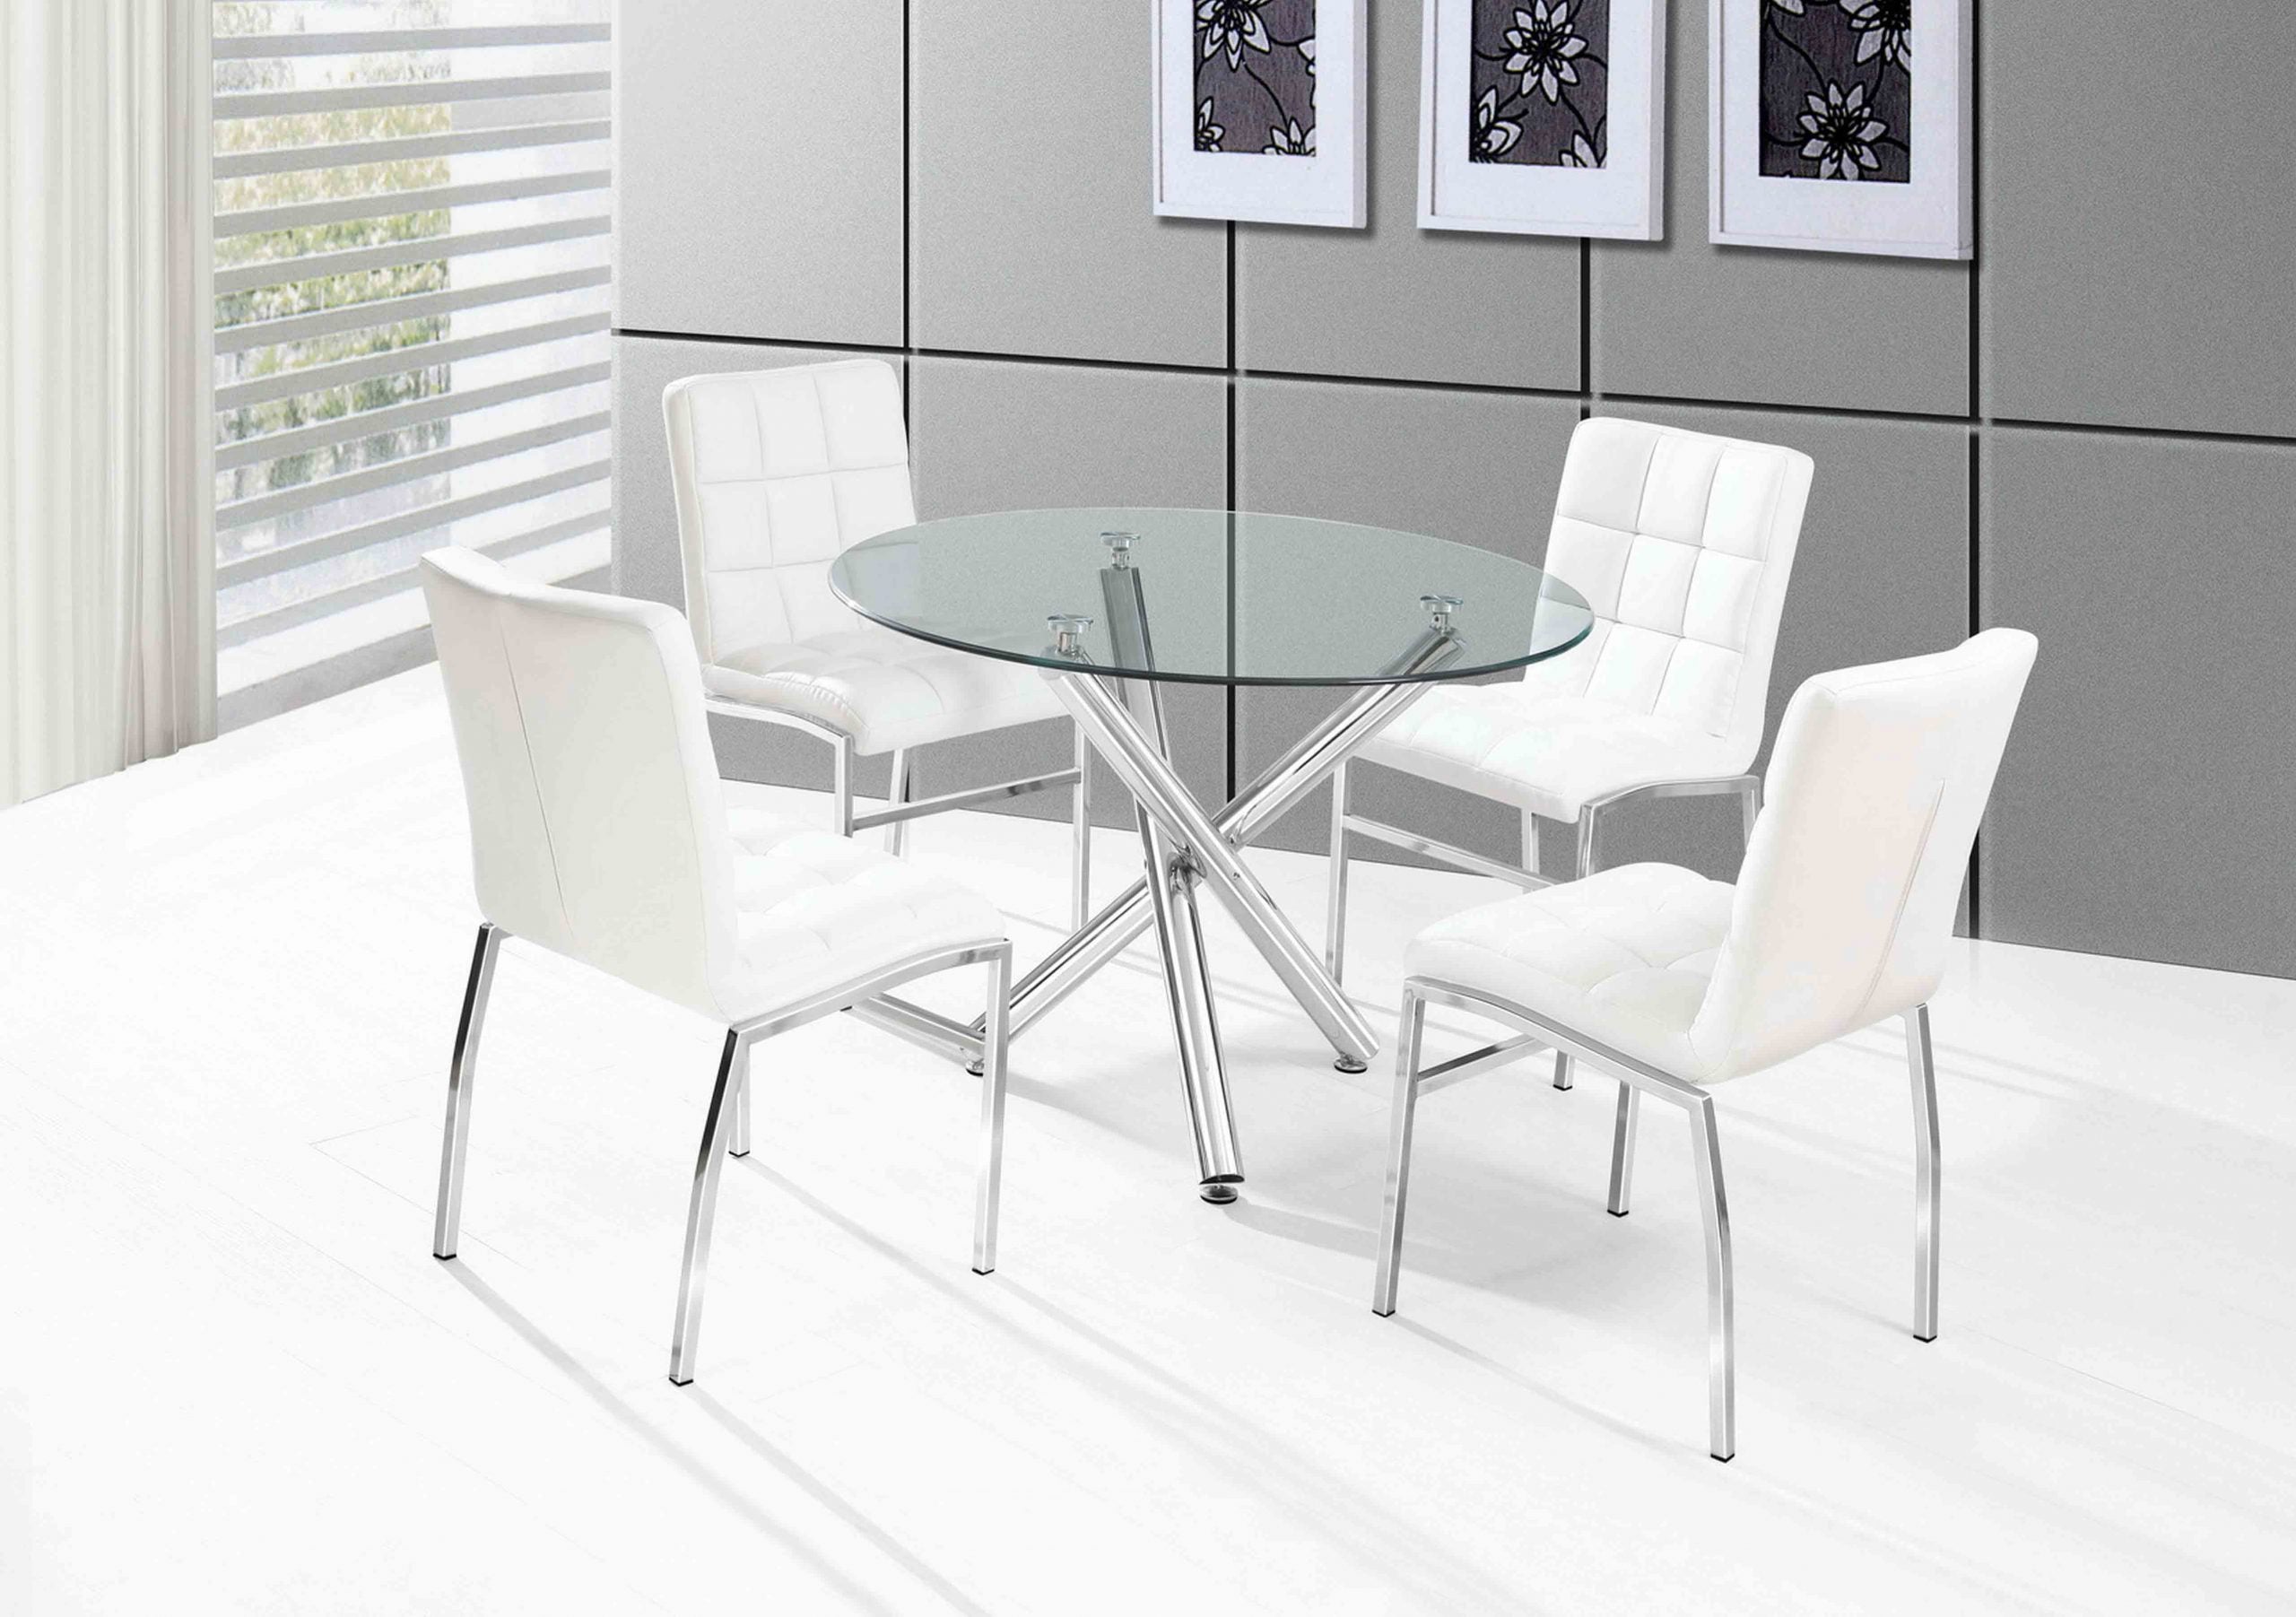 Weston Dining Table with 4 White Chairs DT-811 / C-142